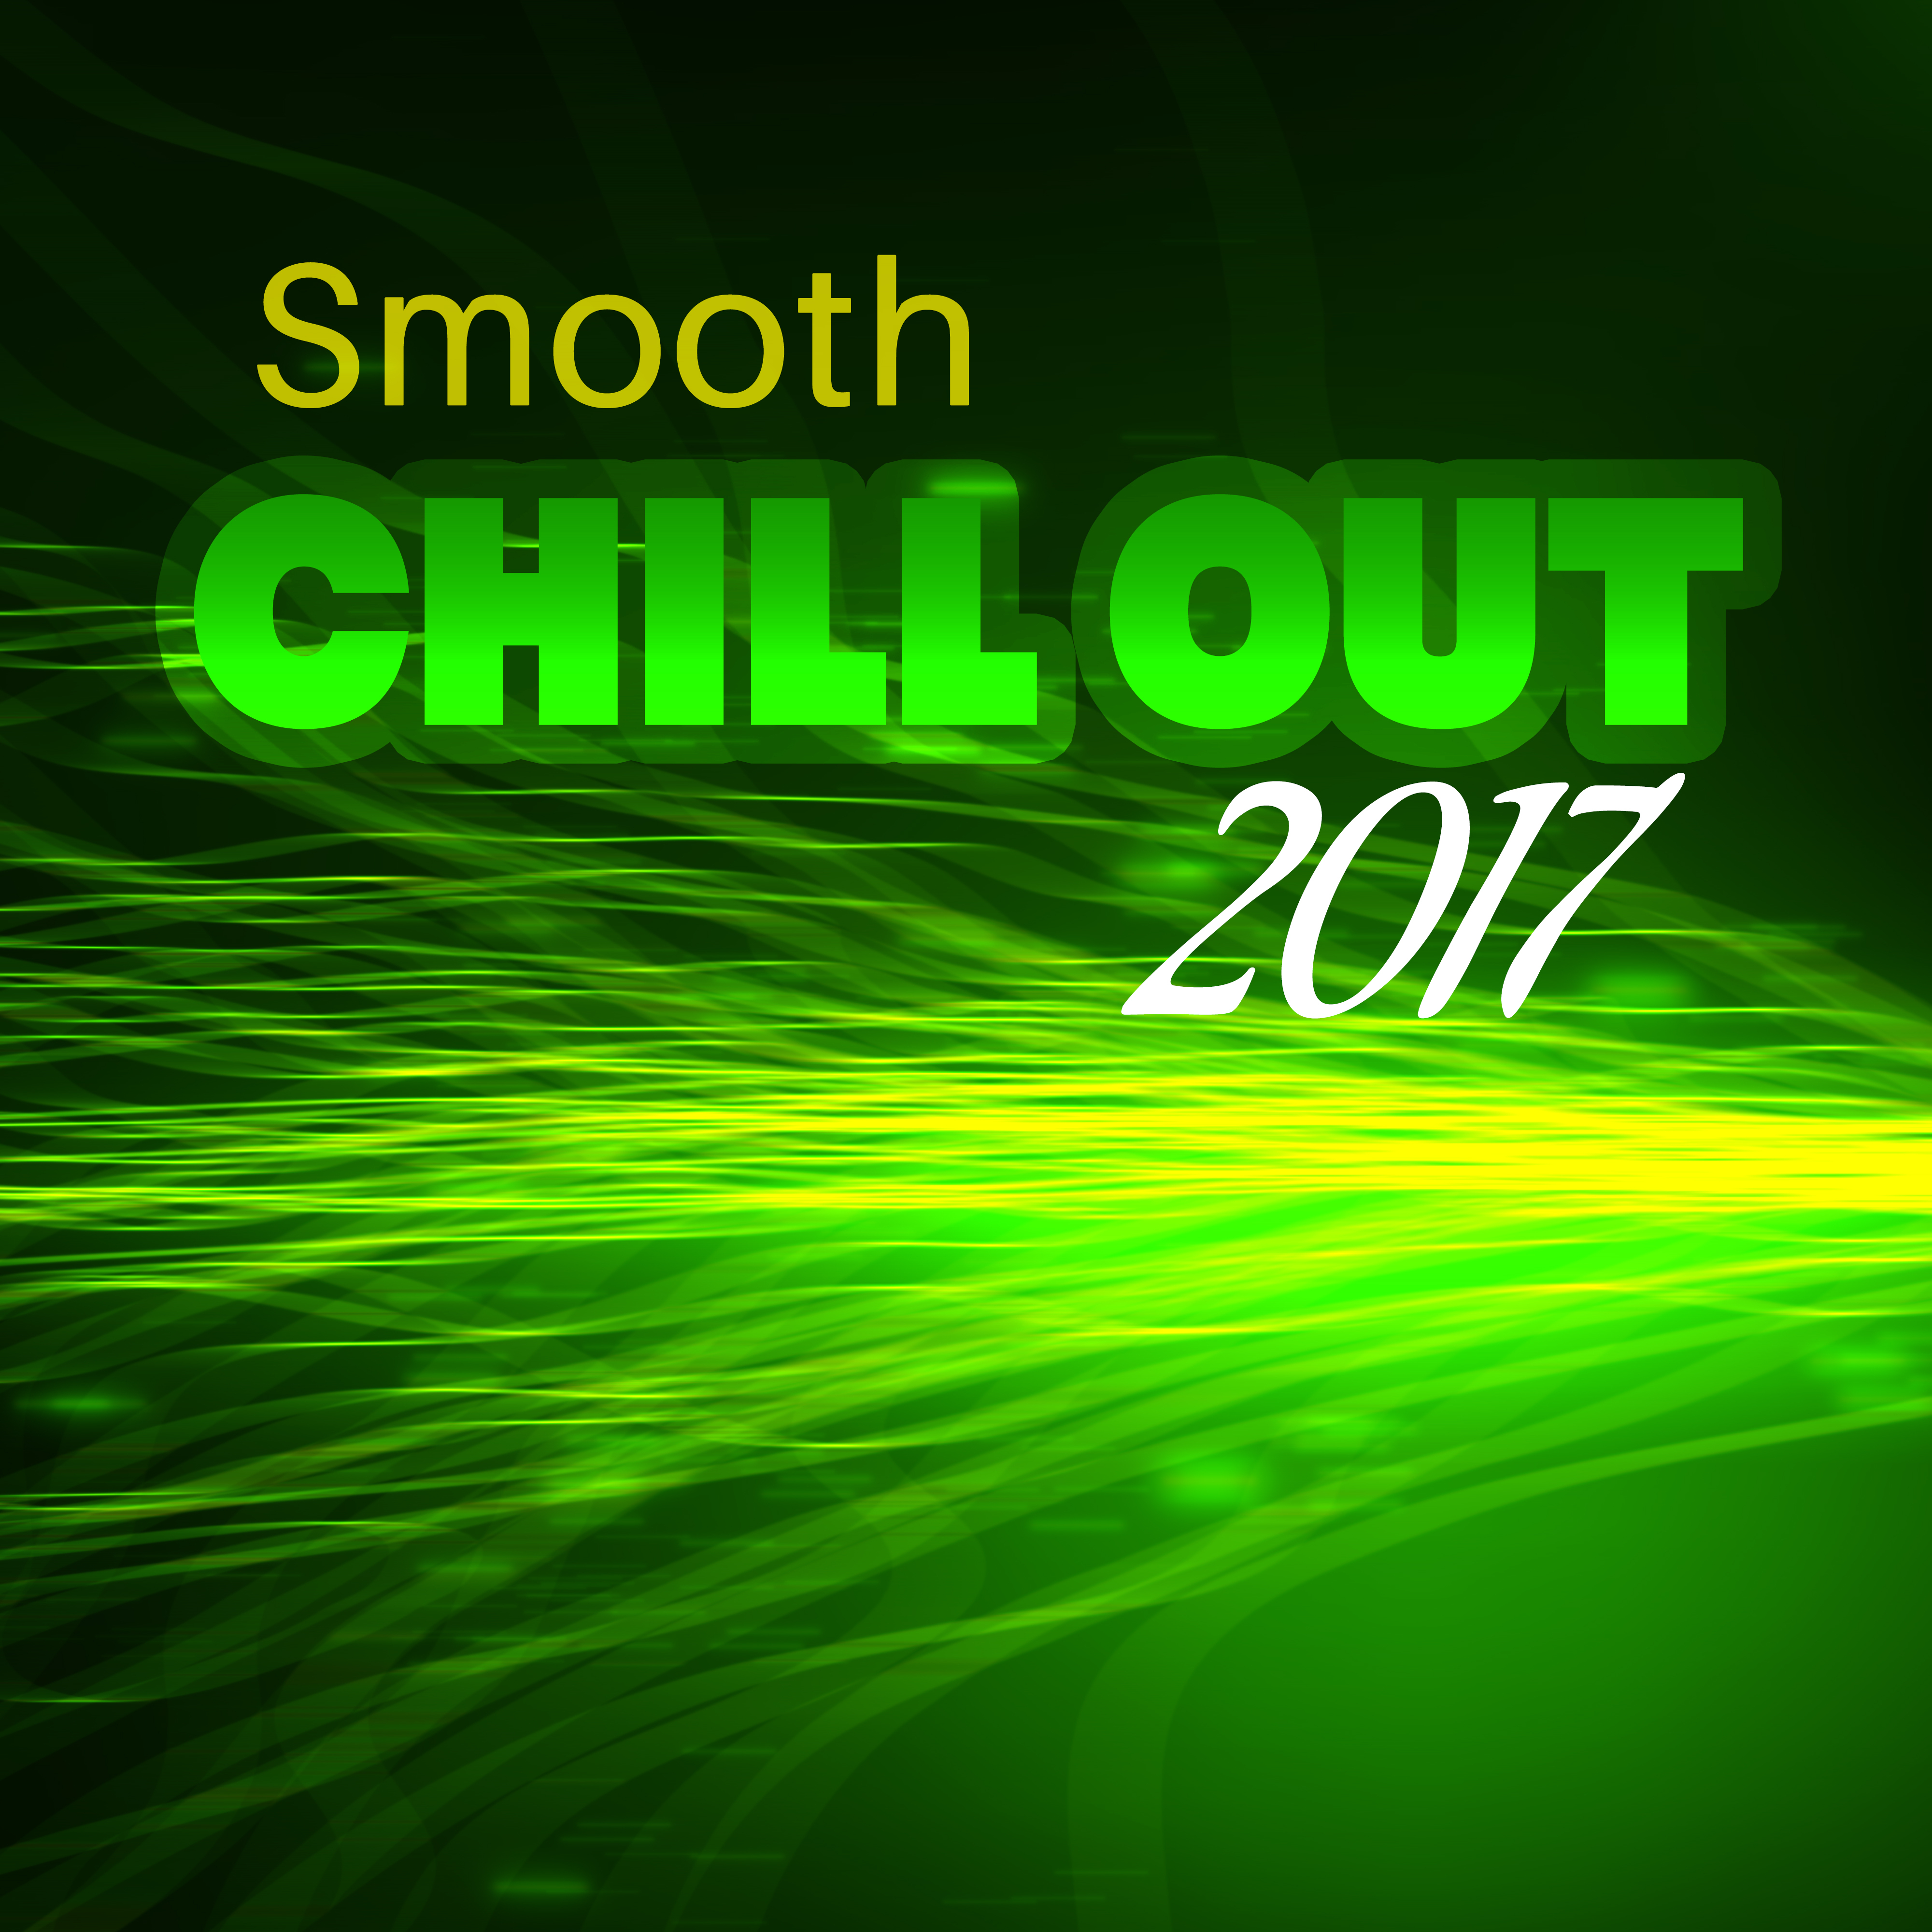 Smooth Chill Out 2017 – Sensual Chill Out Music, Pure Essential, Relax, Calm Chill Out, Lounge